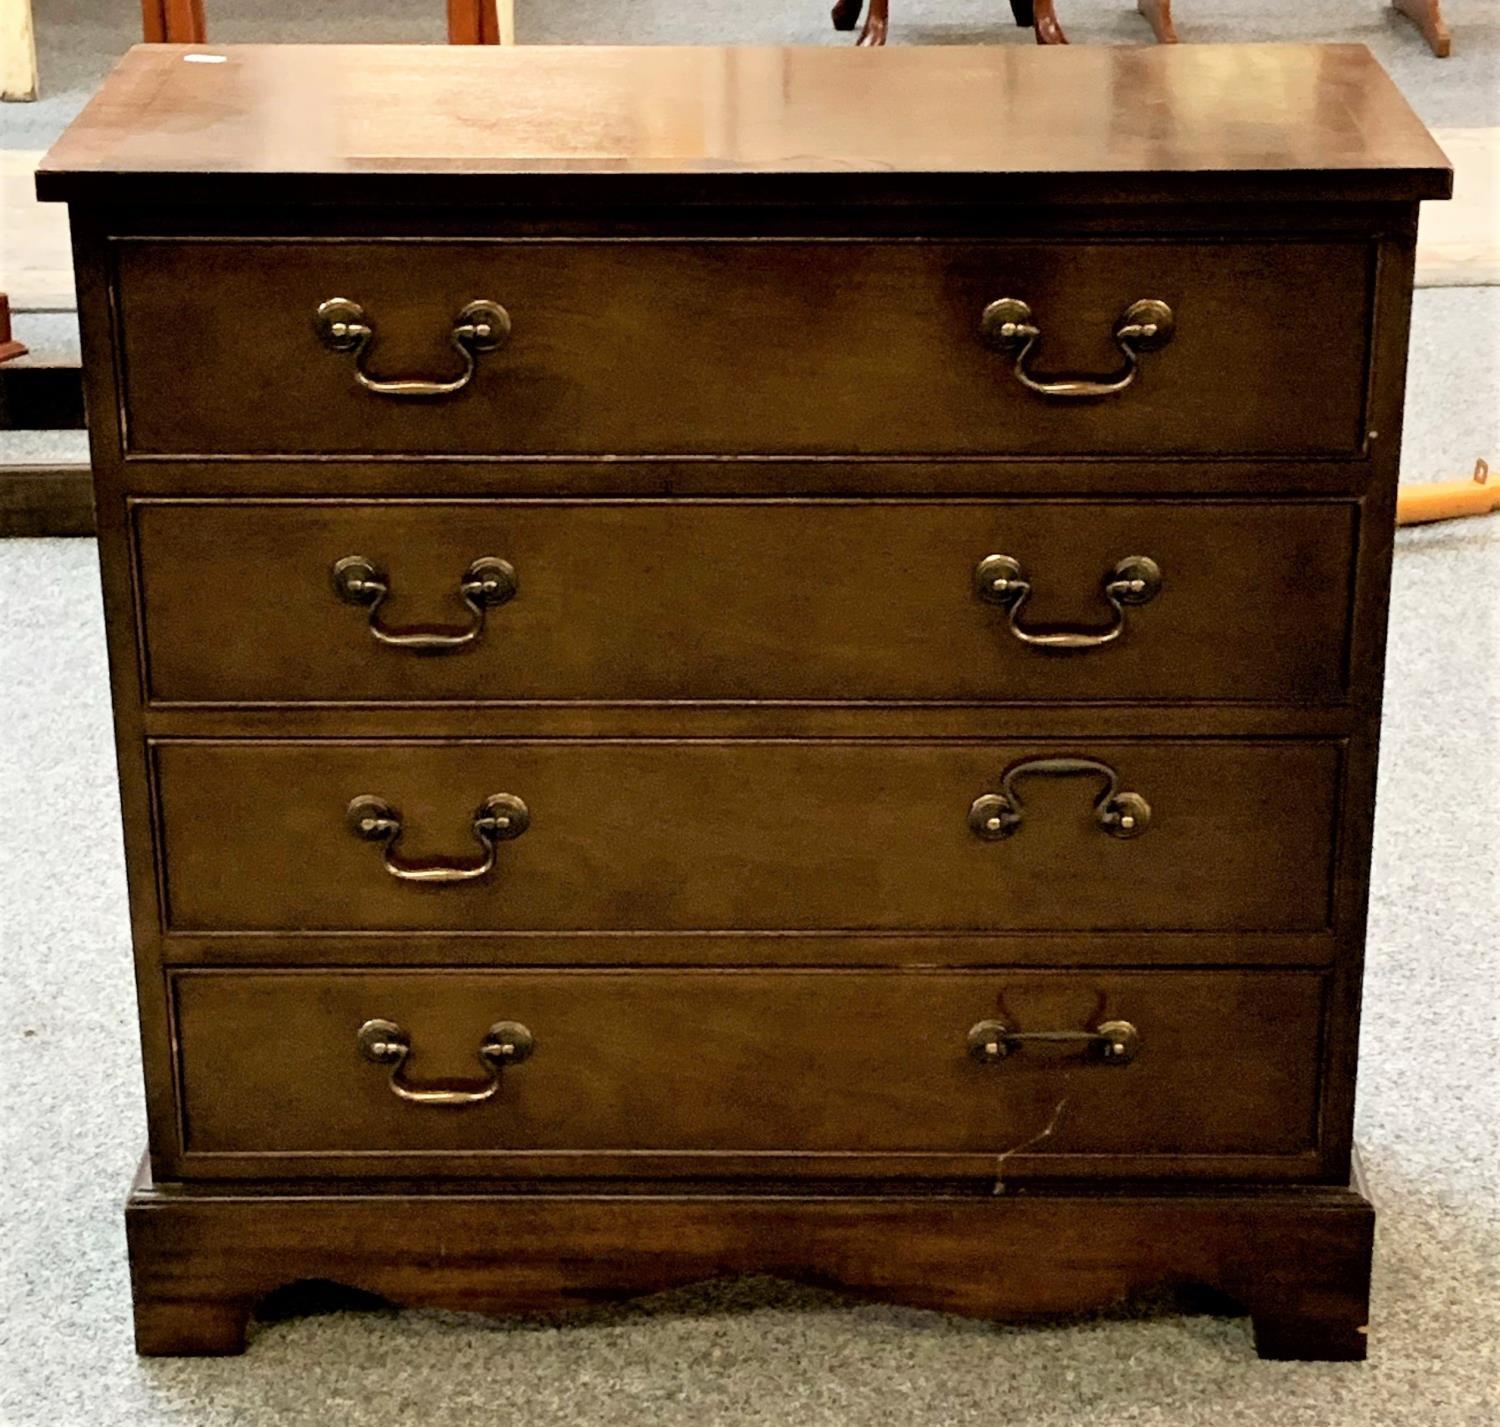 A mahogany 4 drawer chest 77 x 75 x 32 cm, together with a white 2 drawer bedside chest, a pair of